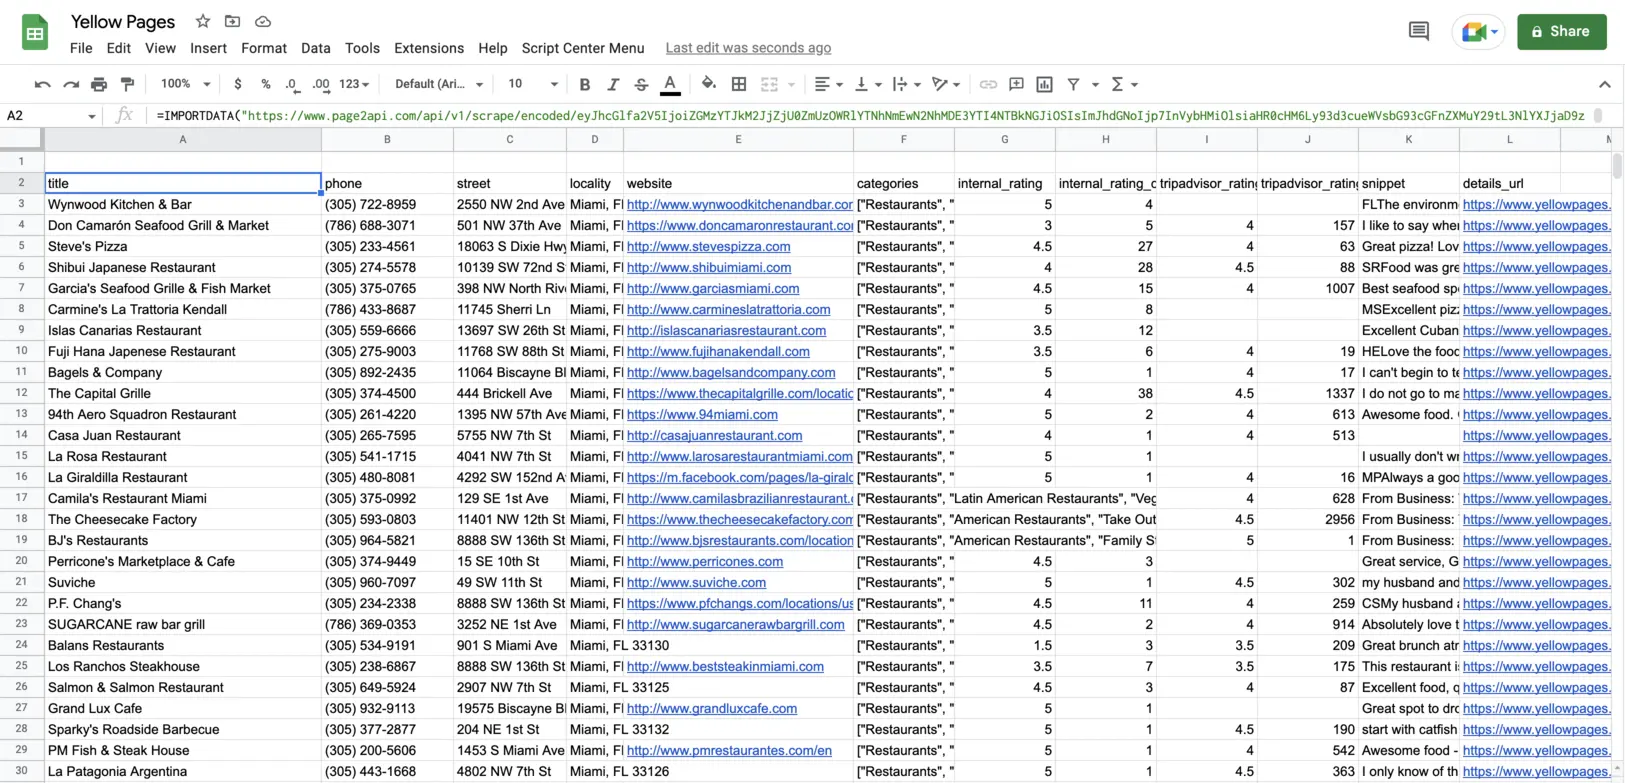 Yellow Pages listings import to Google Sheets